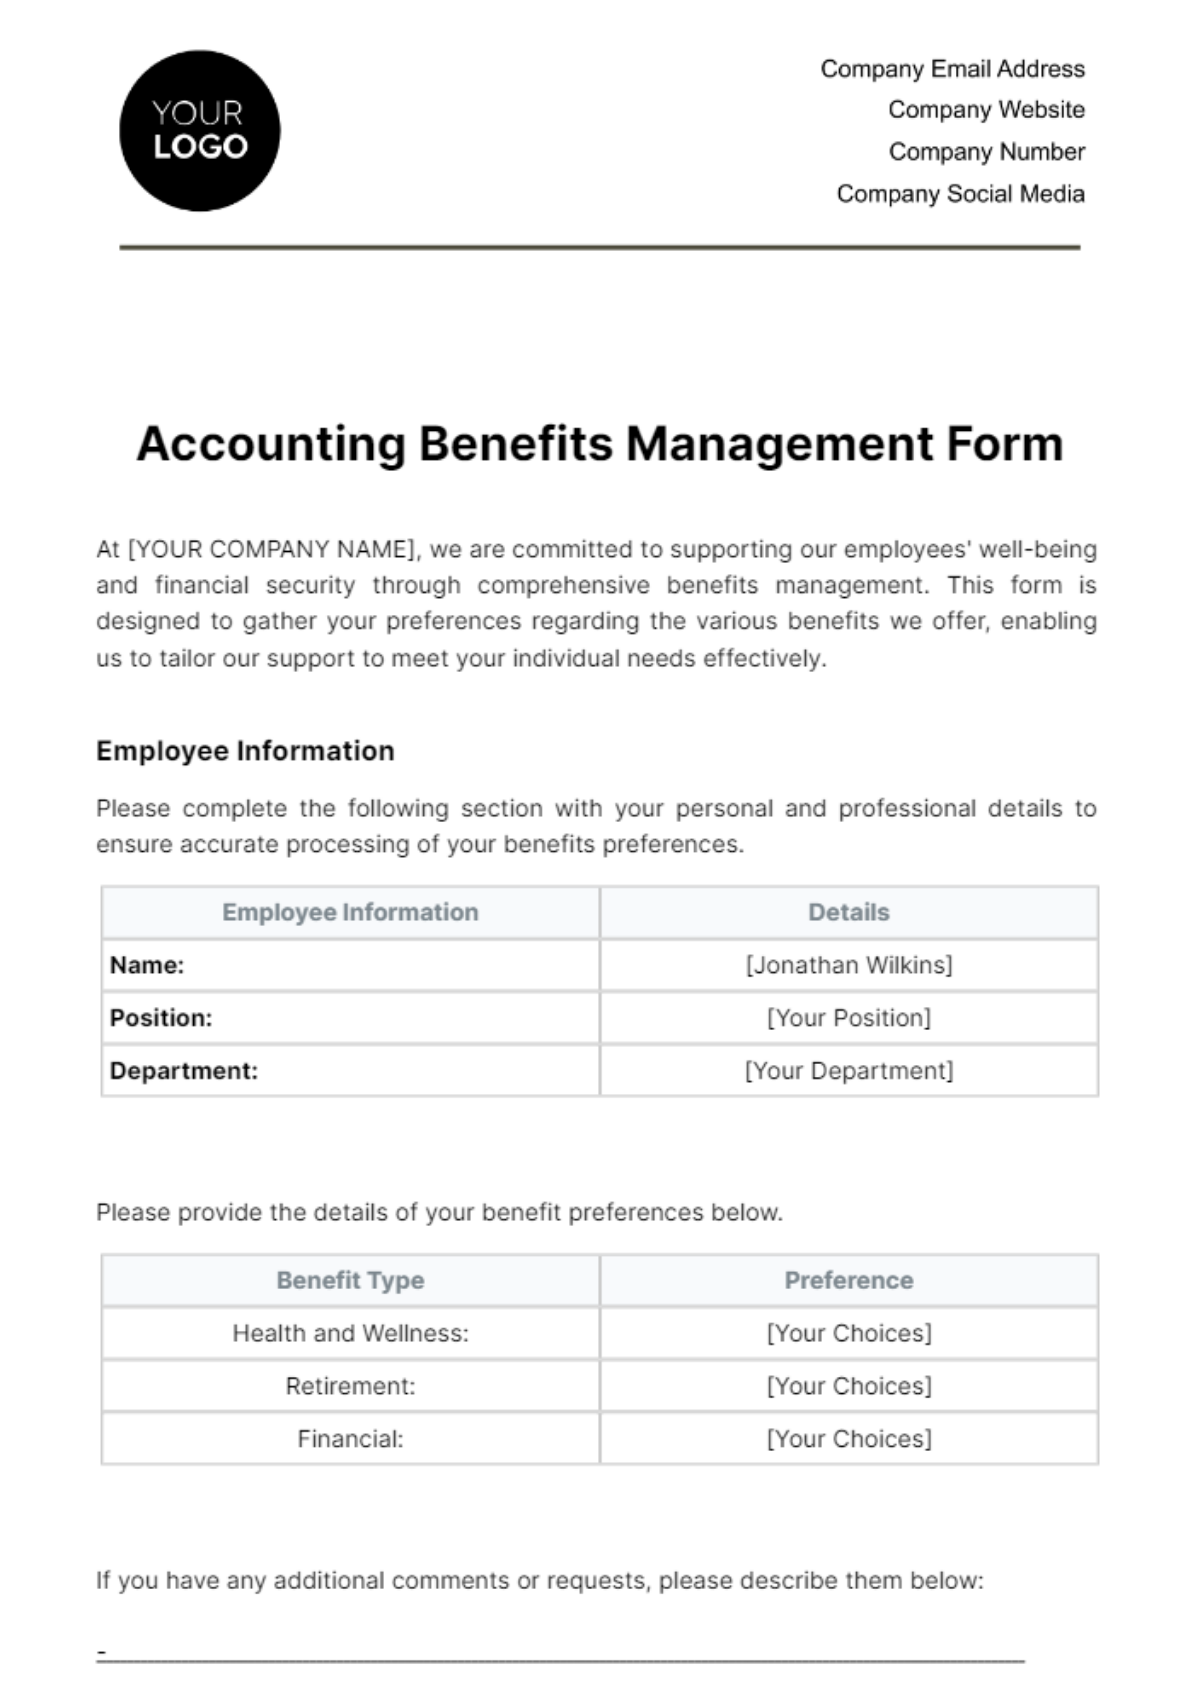 Free Accounting Benefits Management Form Template